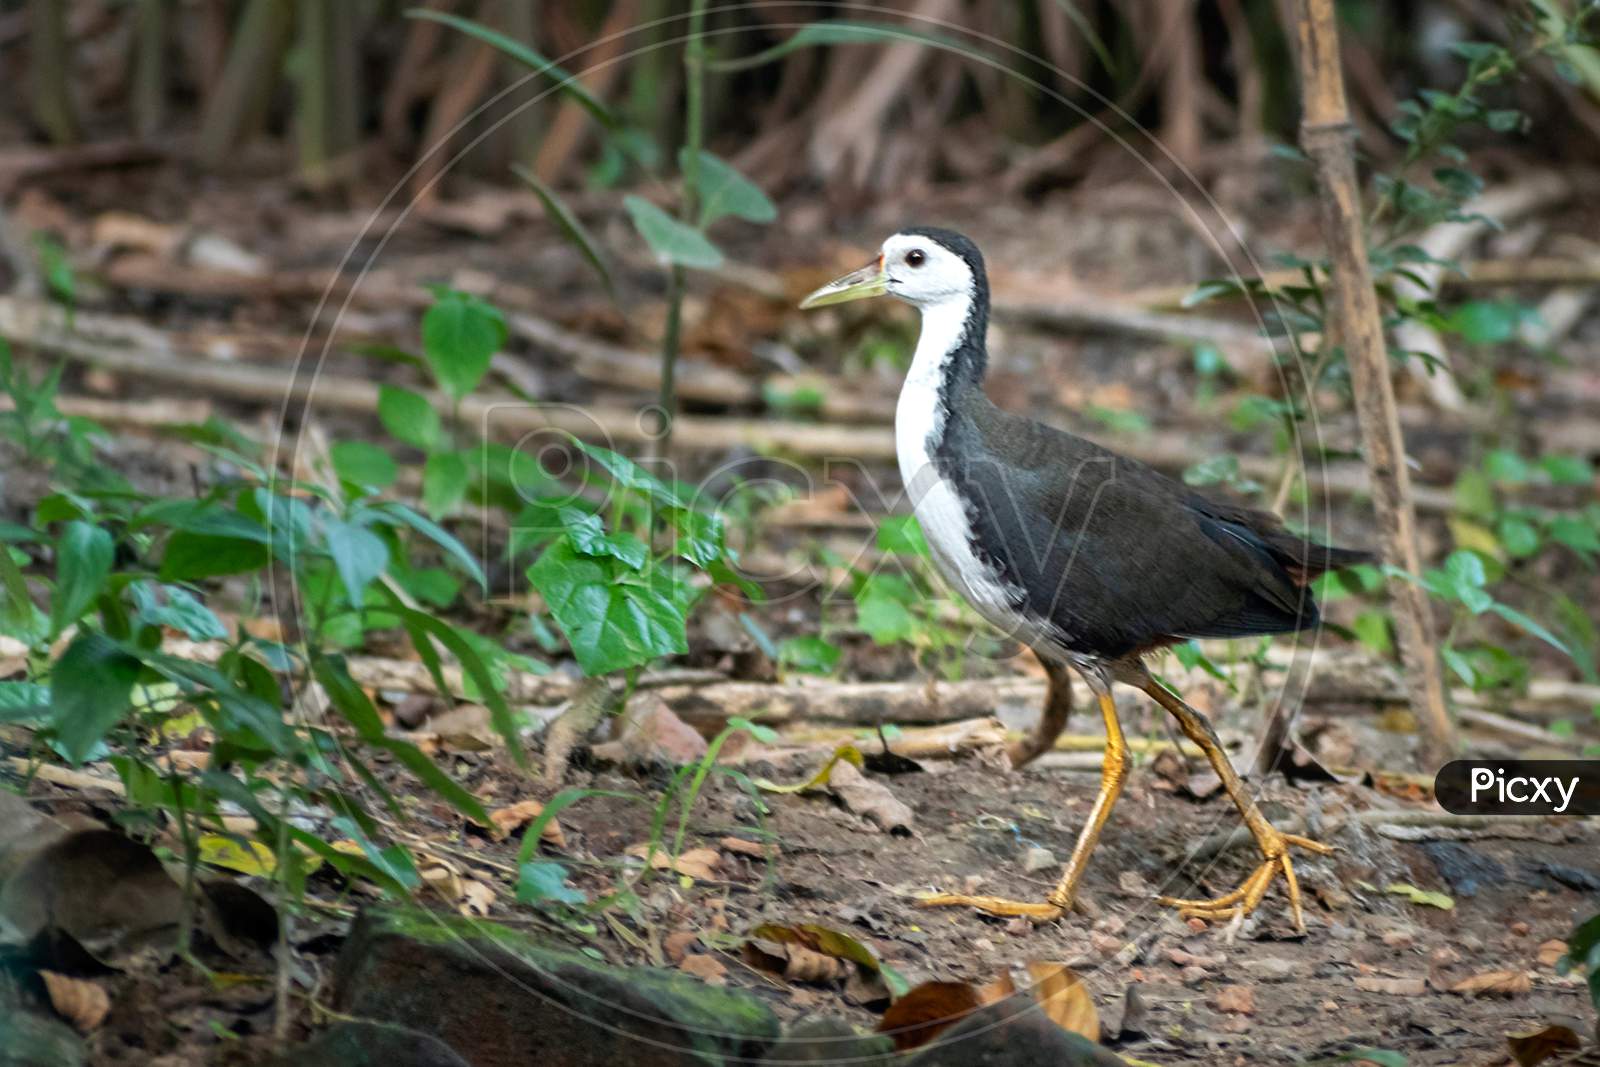 Image of a White-breasted Waterhen inside the forest, also known as Amaurornis phoenicurus